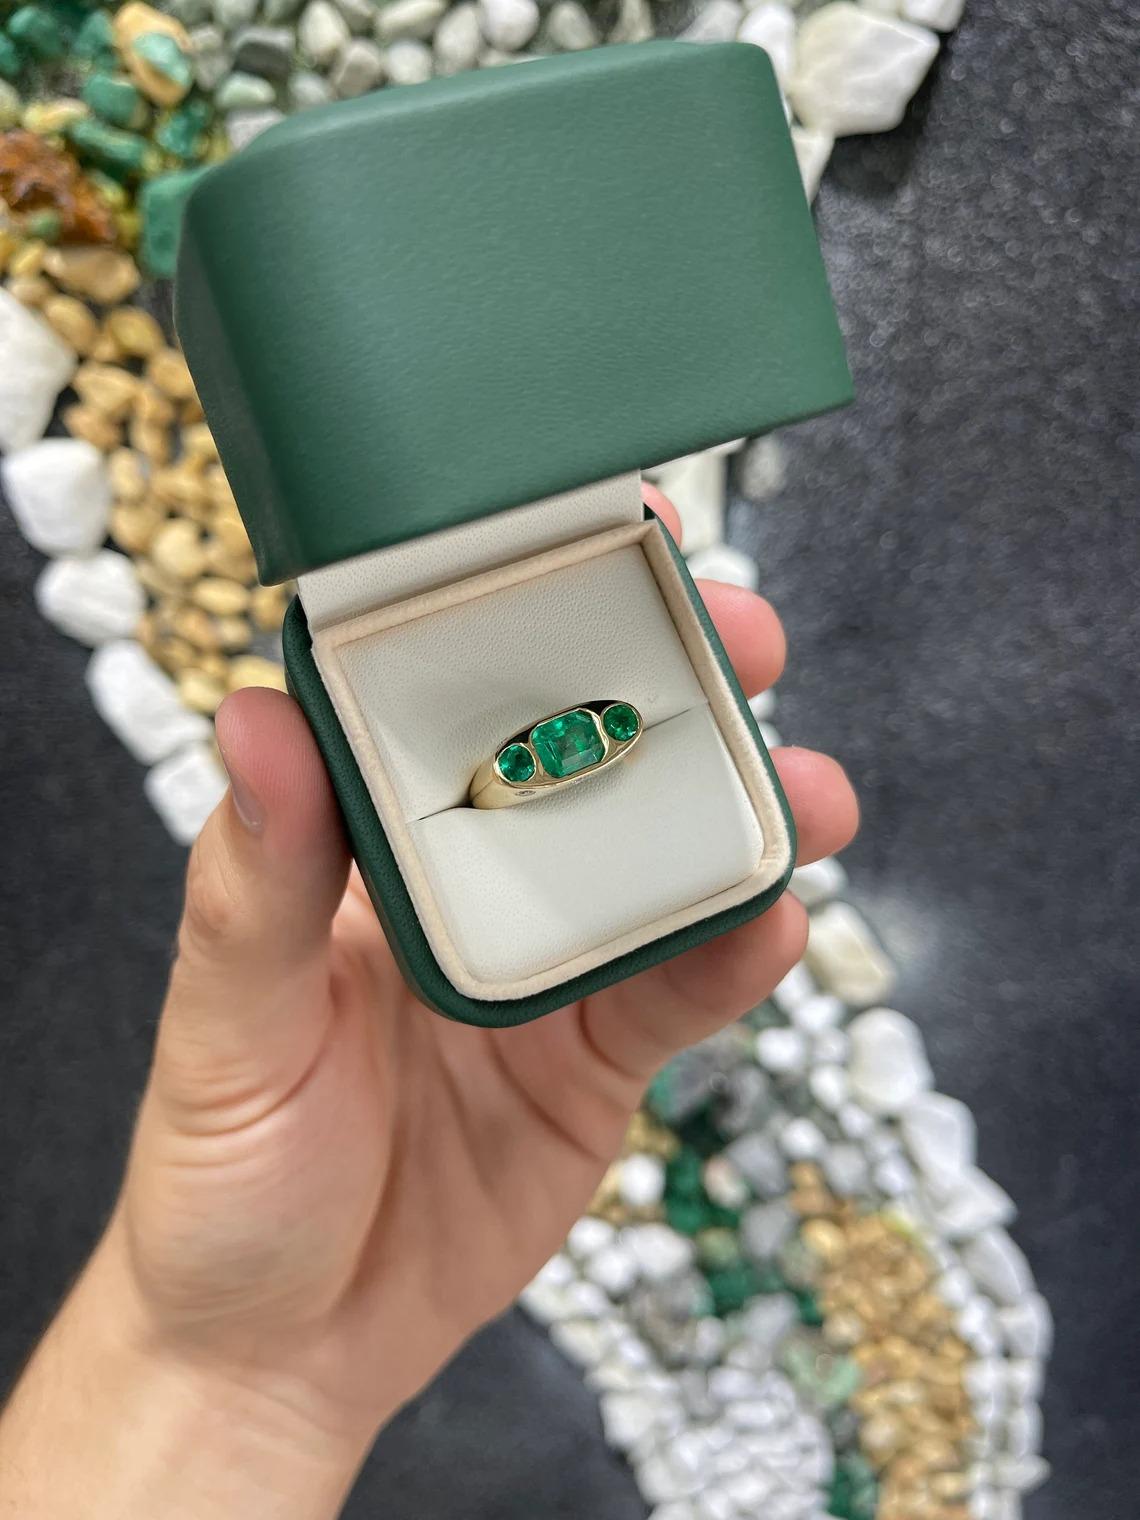 A glamorous, fine-quality Colombian emerald and diamond three-stone ring. The center stone features a striking 1.94-carat, emerald-cut Colombian emerald set east to west. This stone displays a stunning vivid green color, close to excellent eye